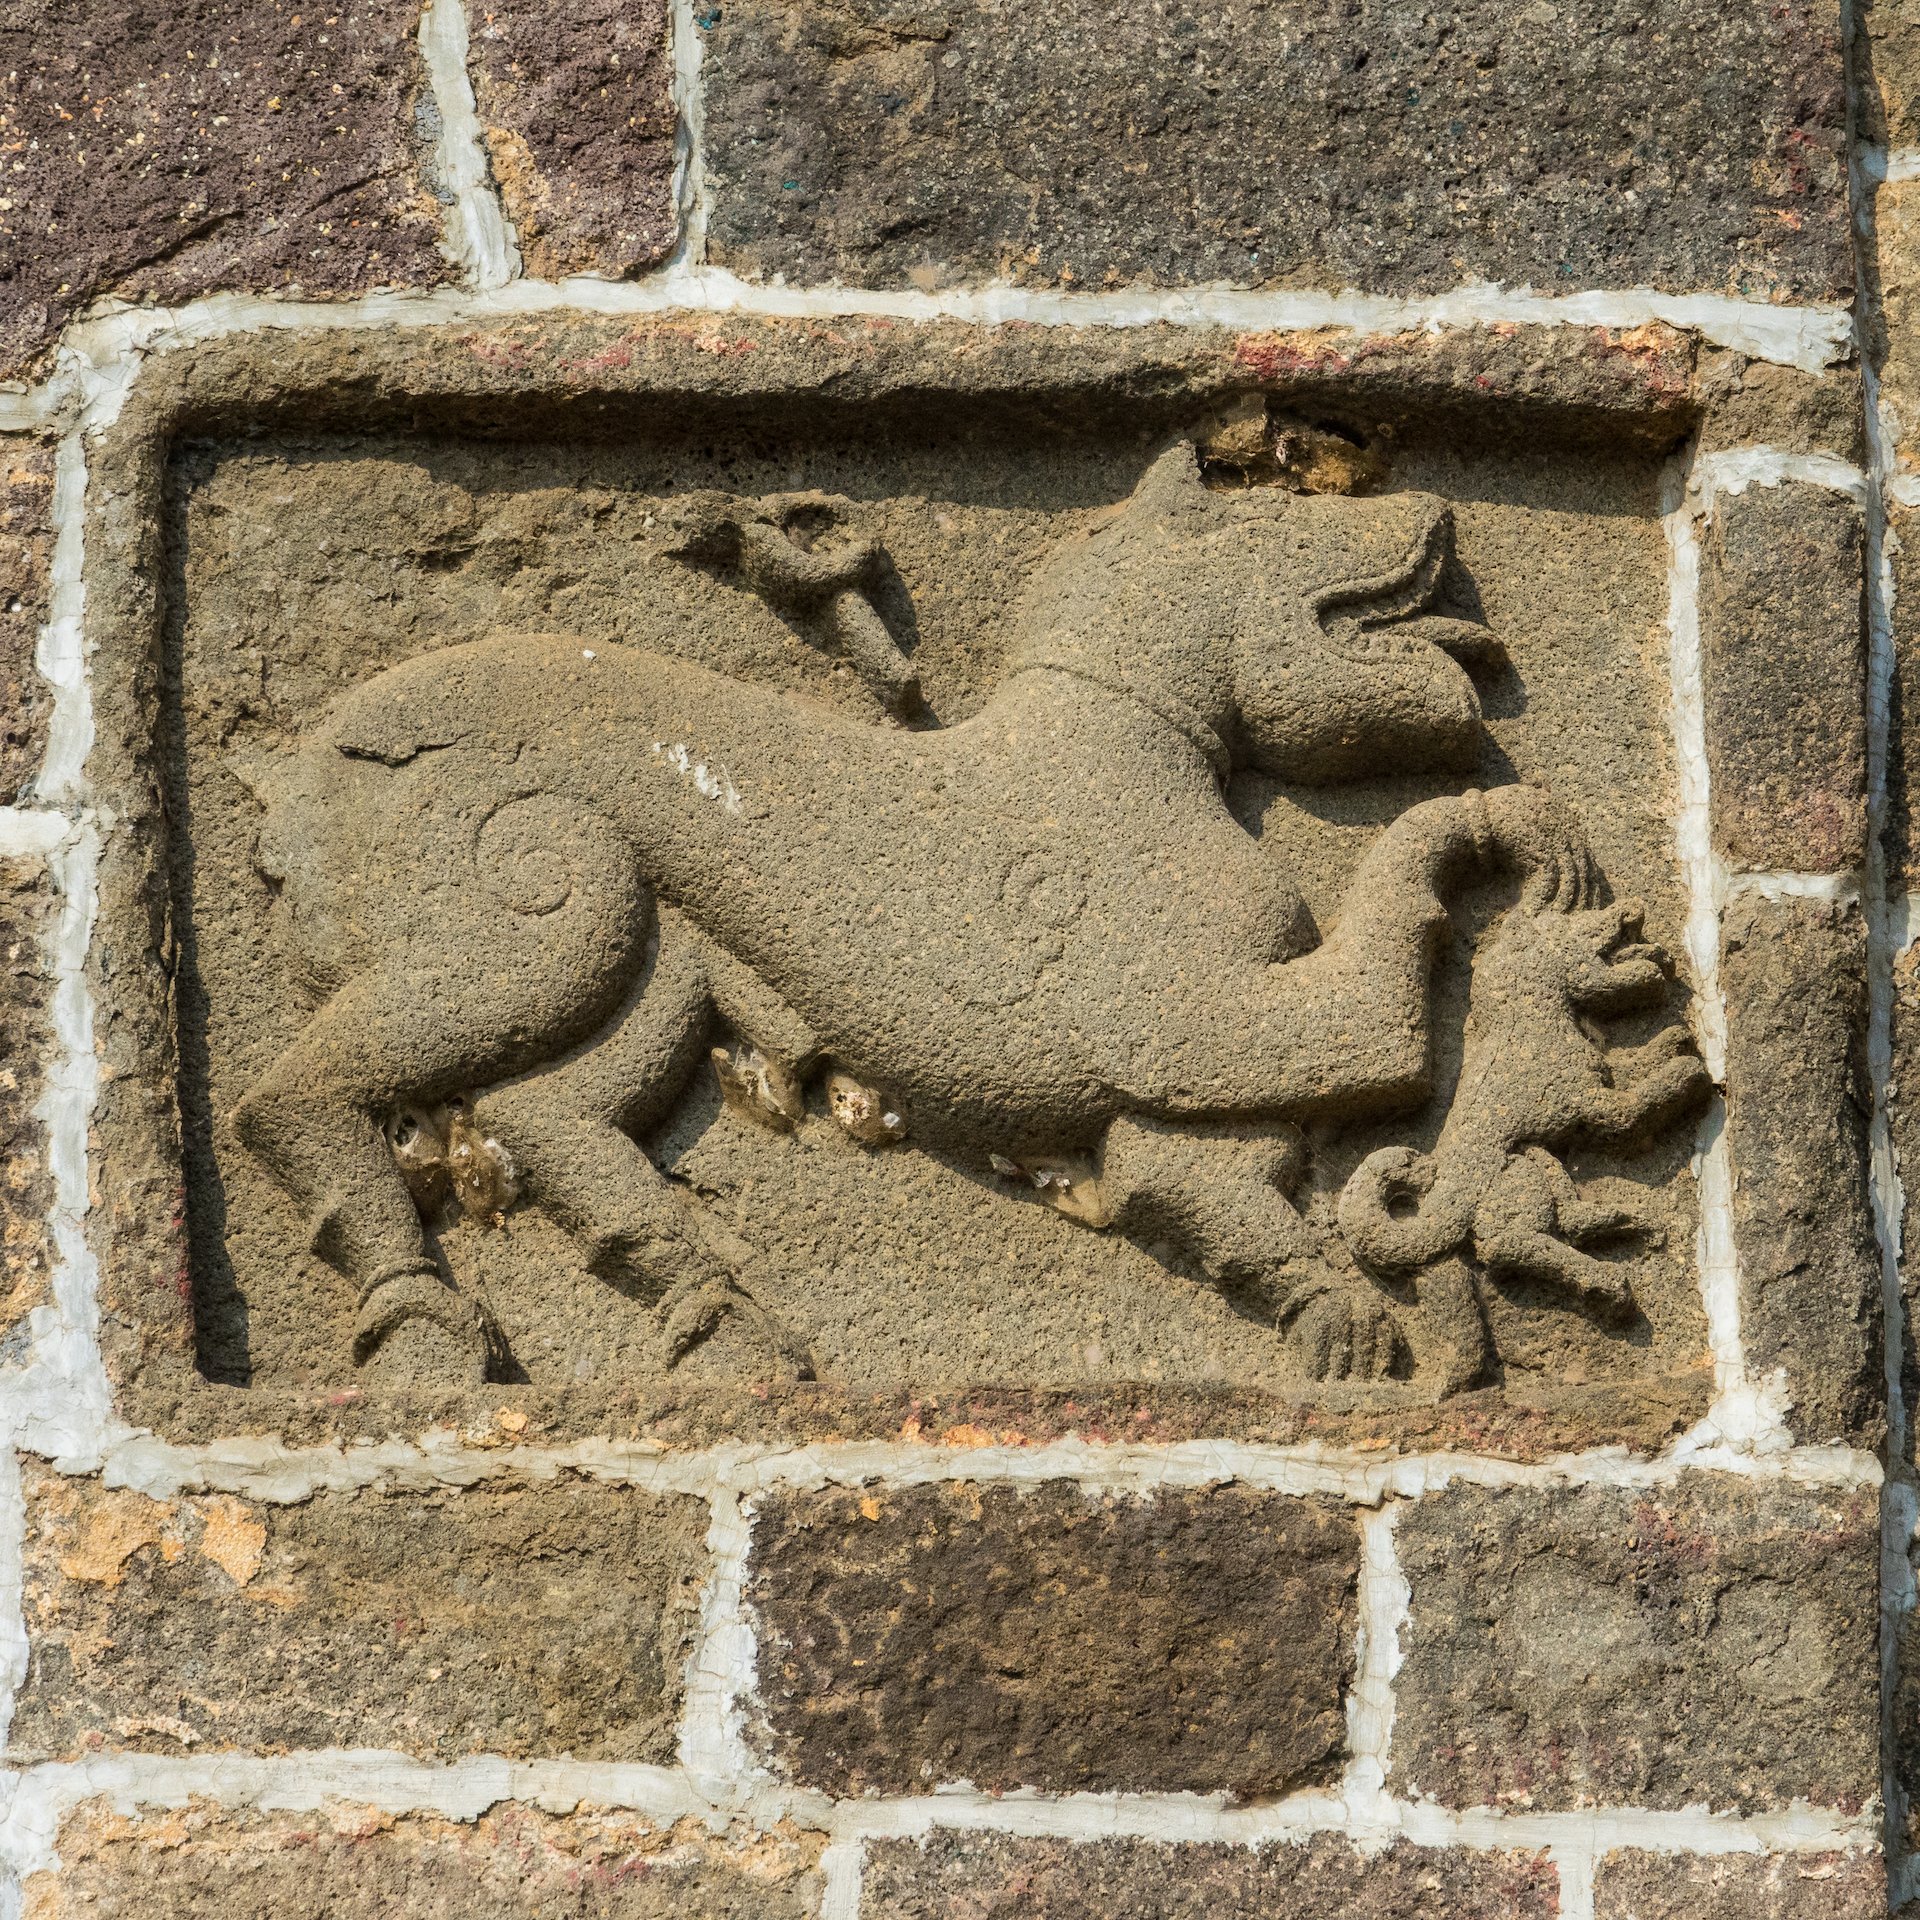  At many of the gates there were carvings like these. 